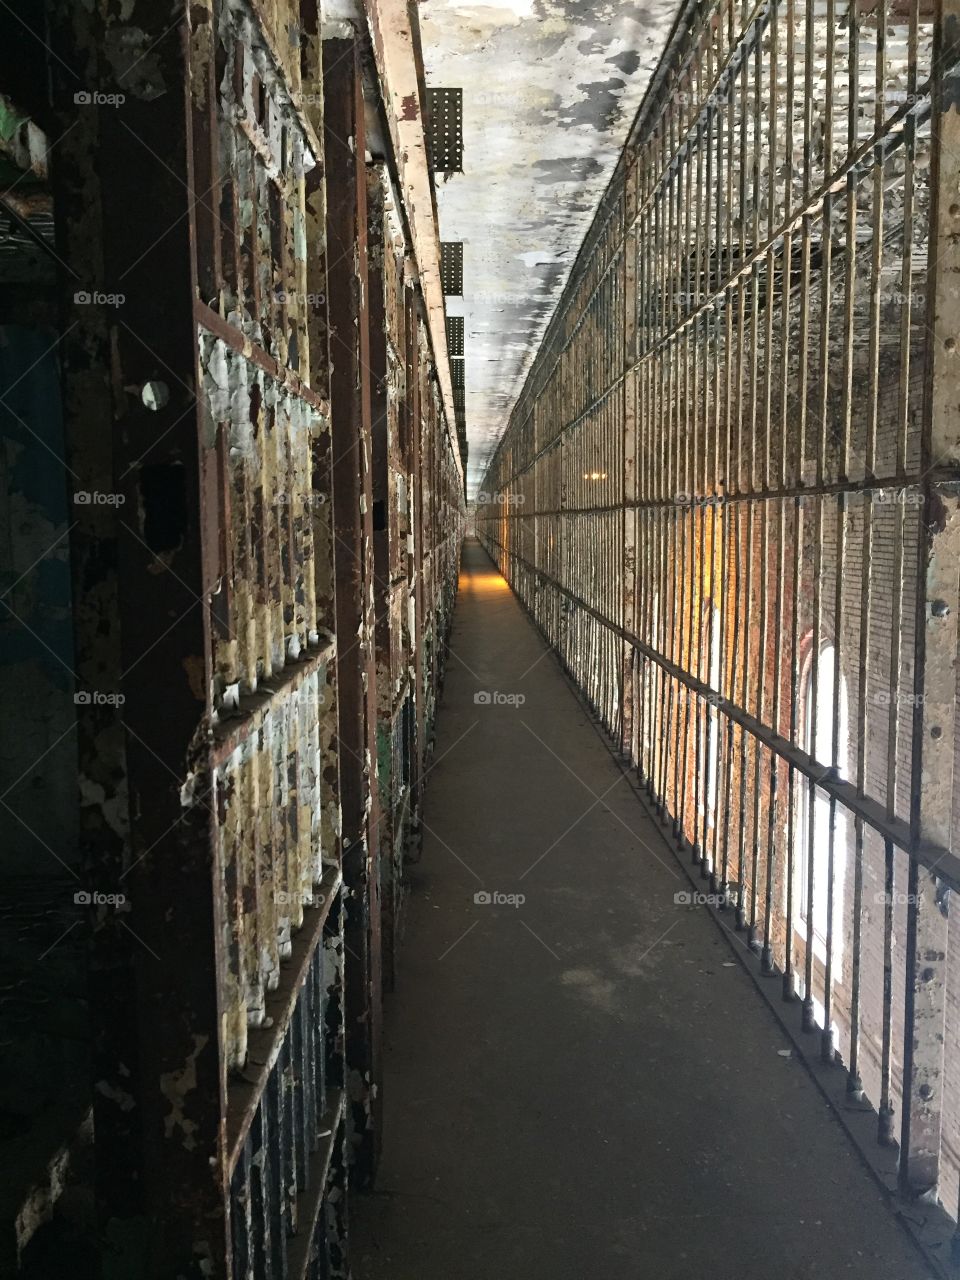 Reformatory cell 2